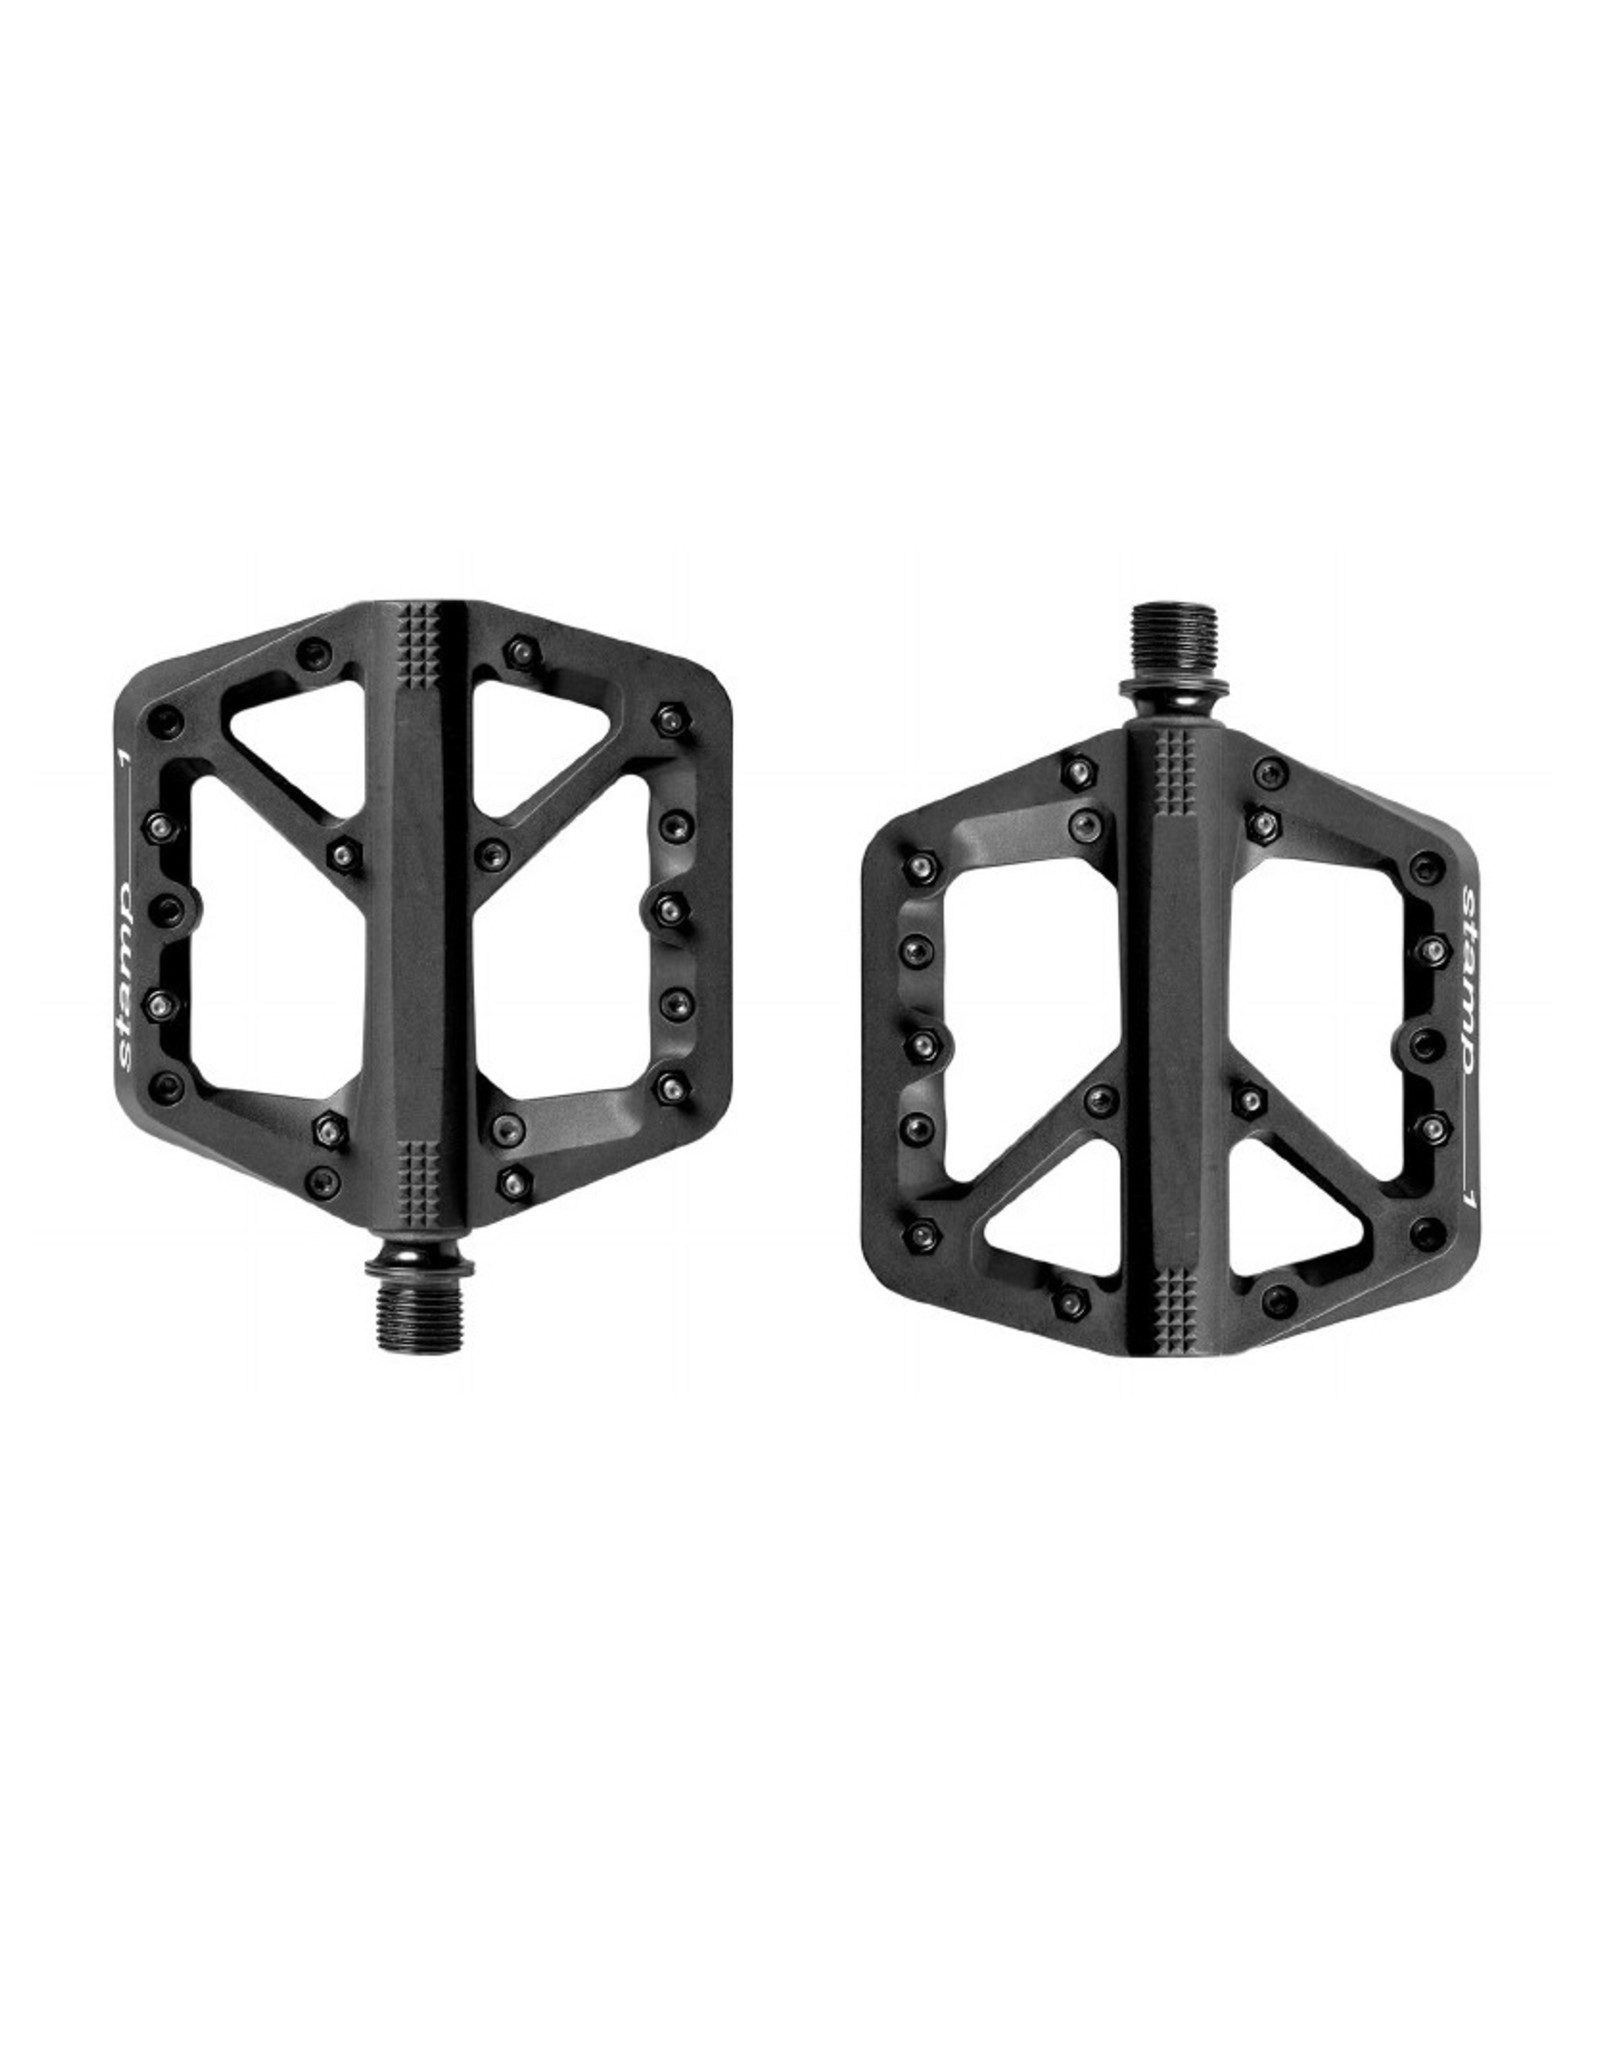 Pedals - Crank Brothers Stamp 1 Small Black Composite - Urban AdvenTours